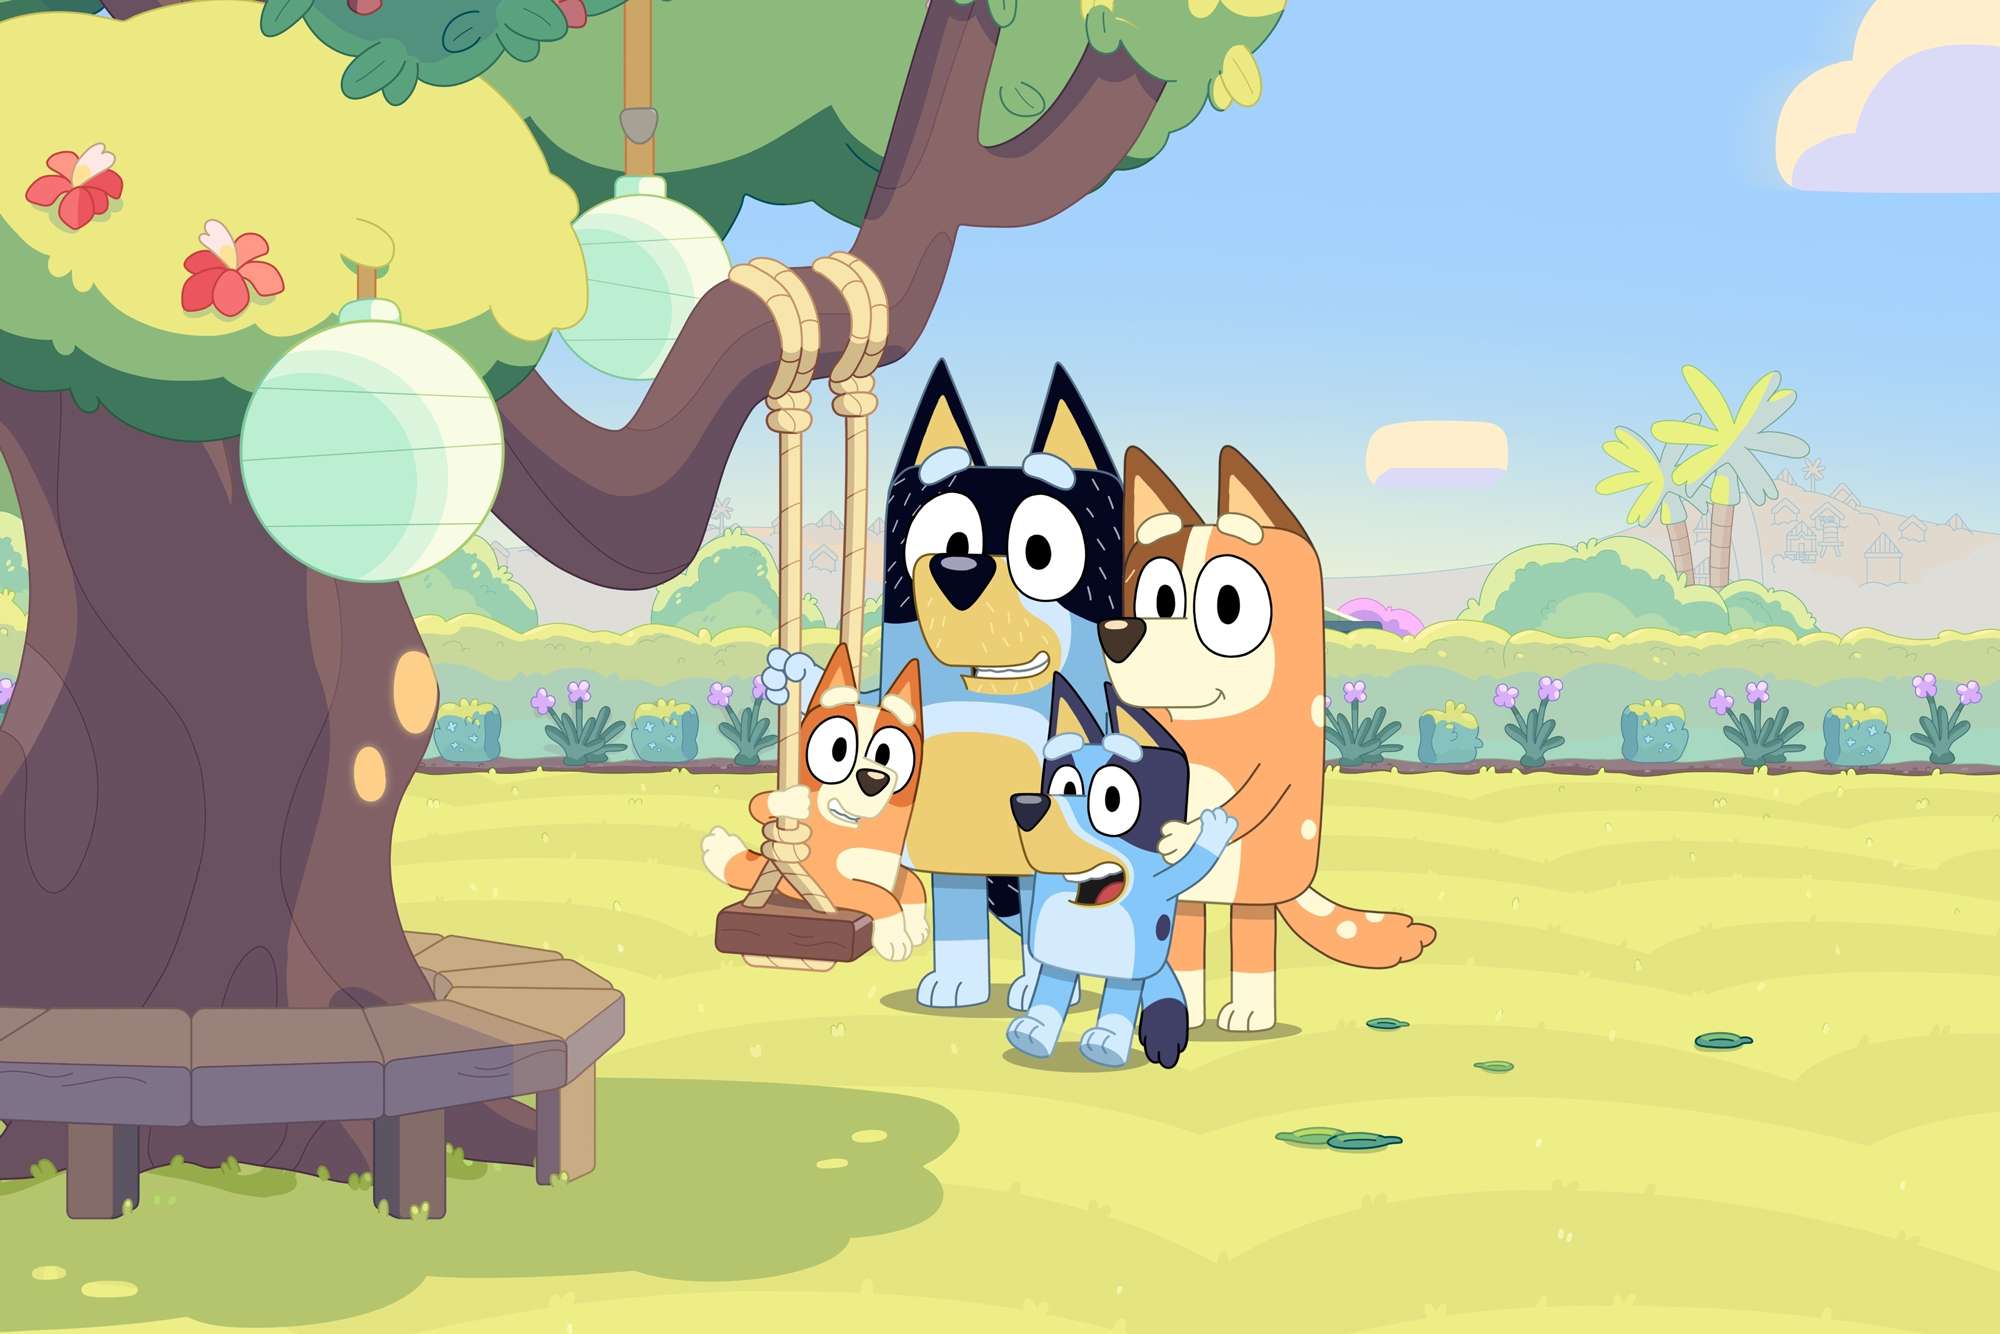 10 Shows Like “Bluey” to Watch Now